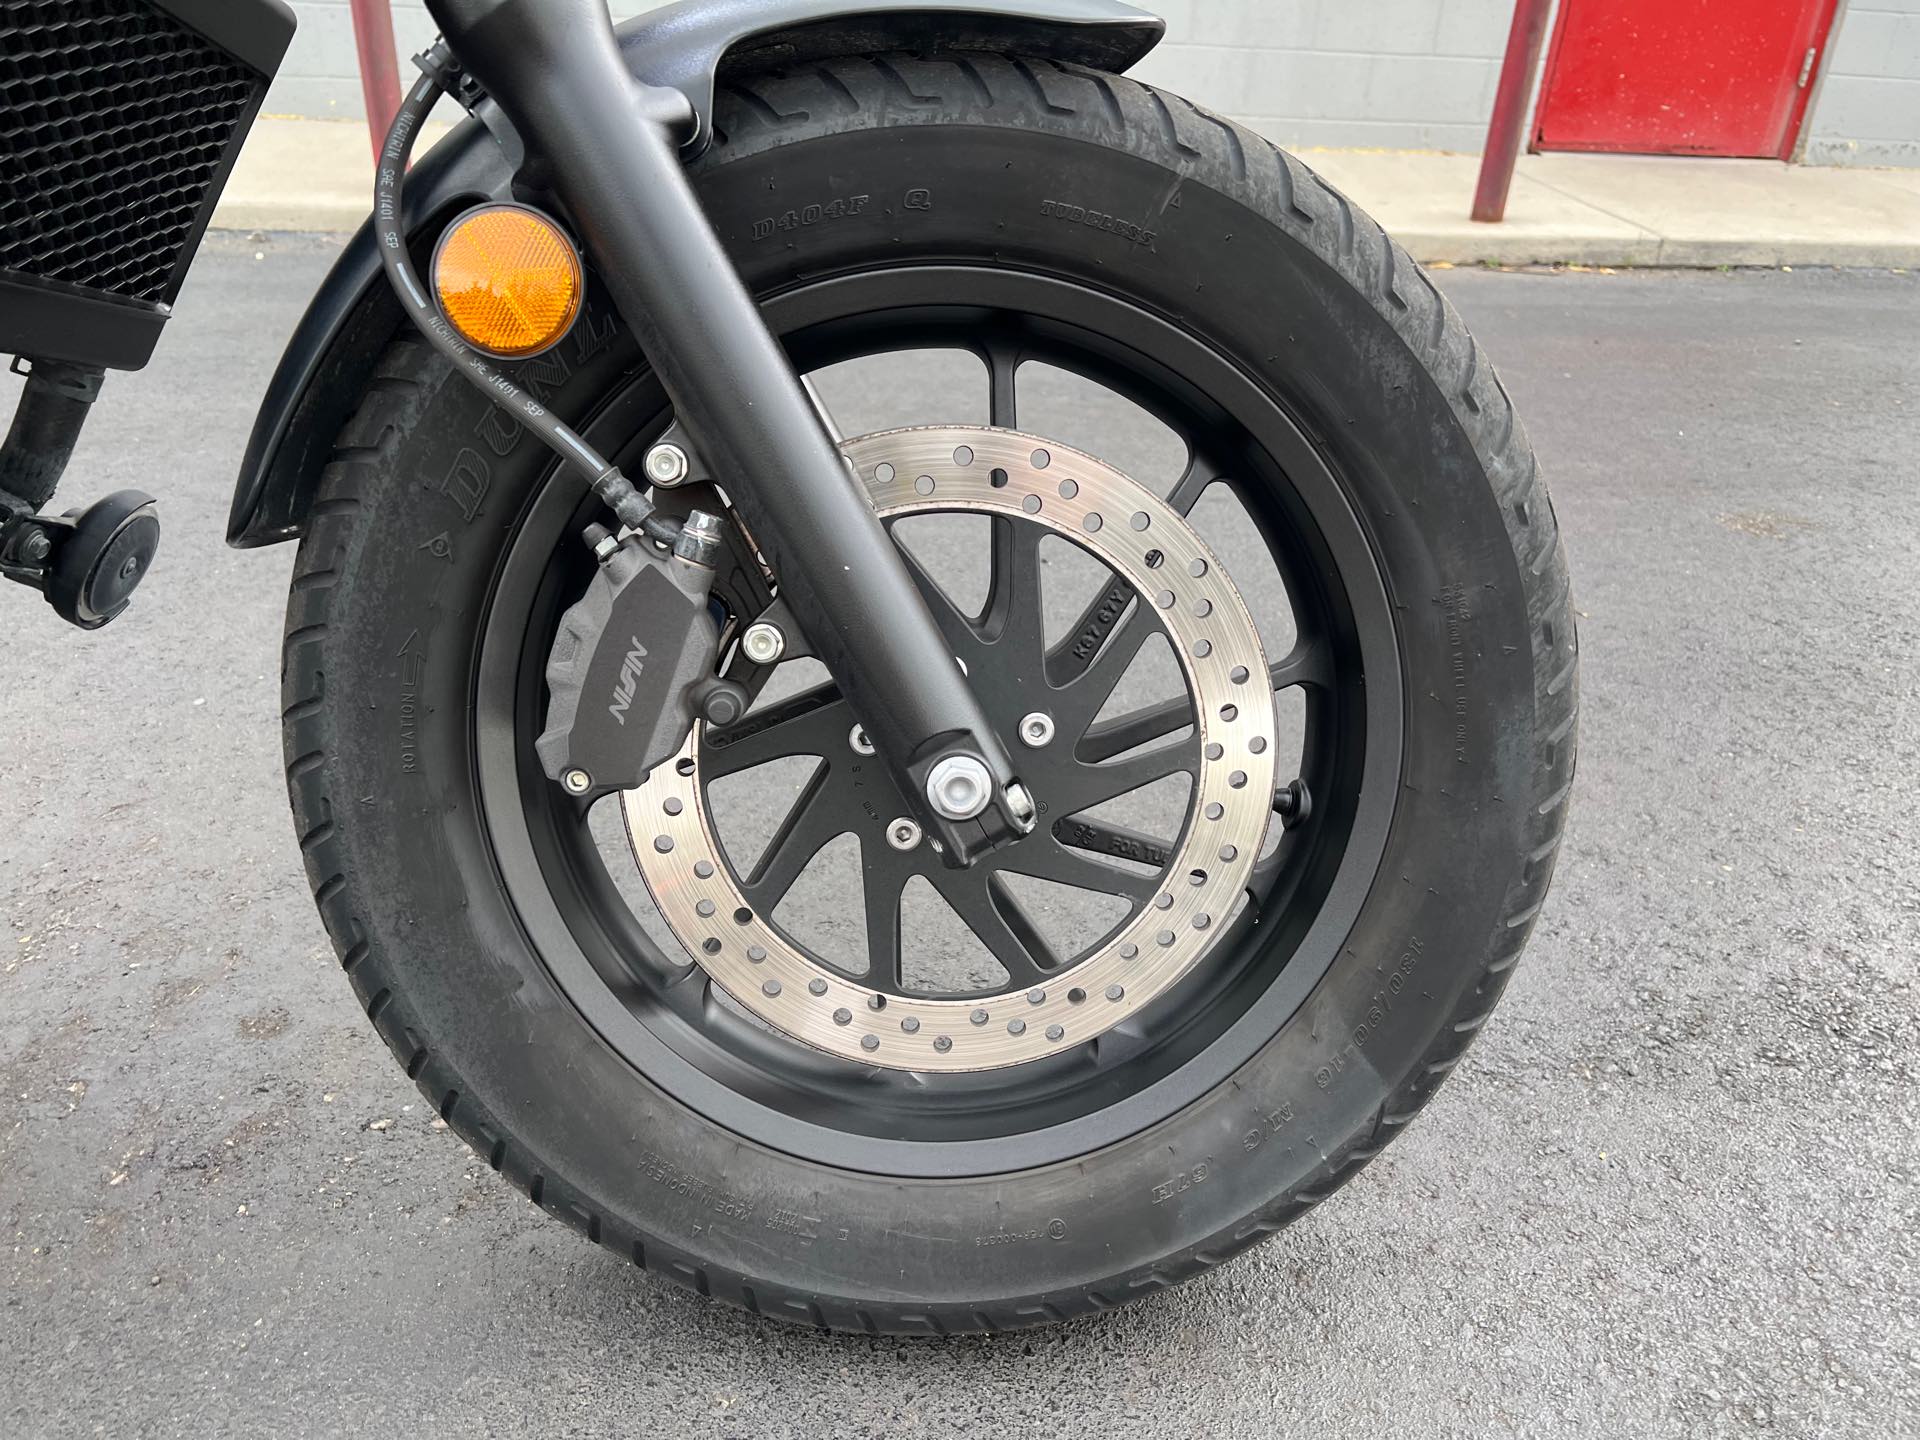 2018 Honda Rebel 500 at Aces Motorcycles - Fort Collins